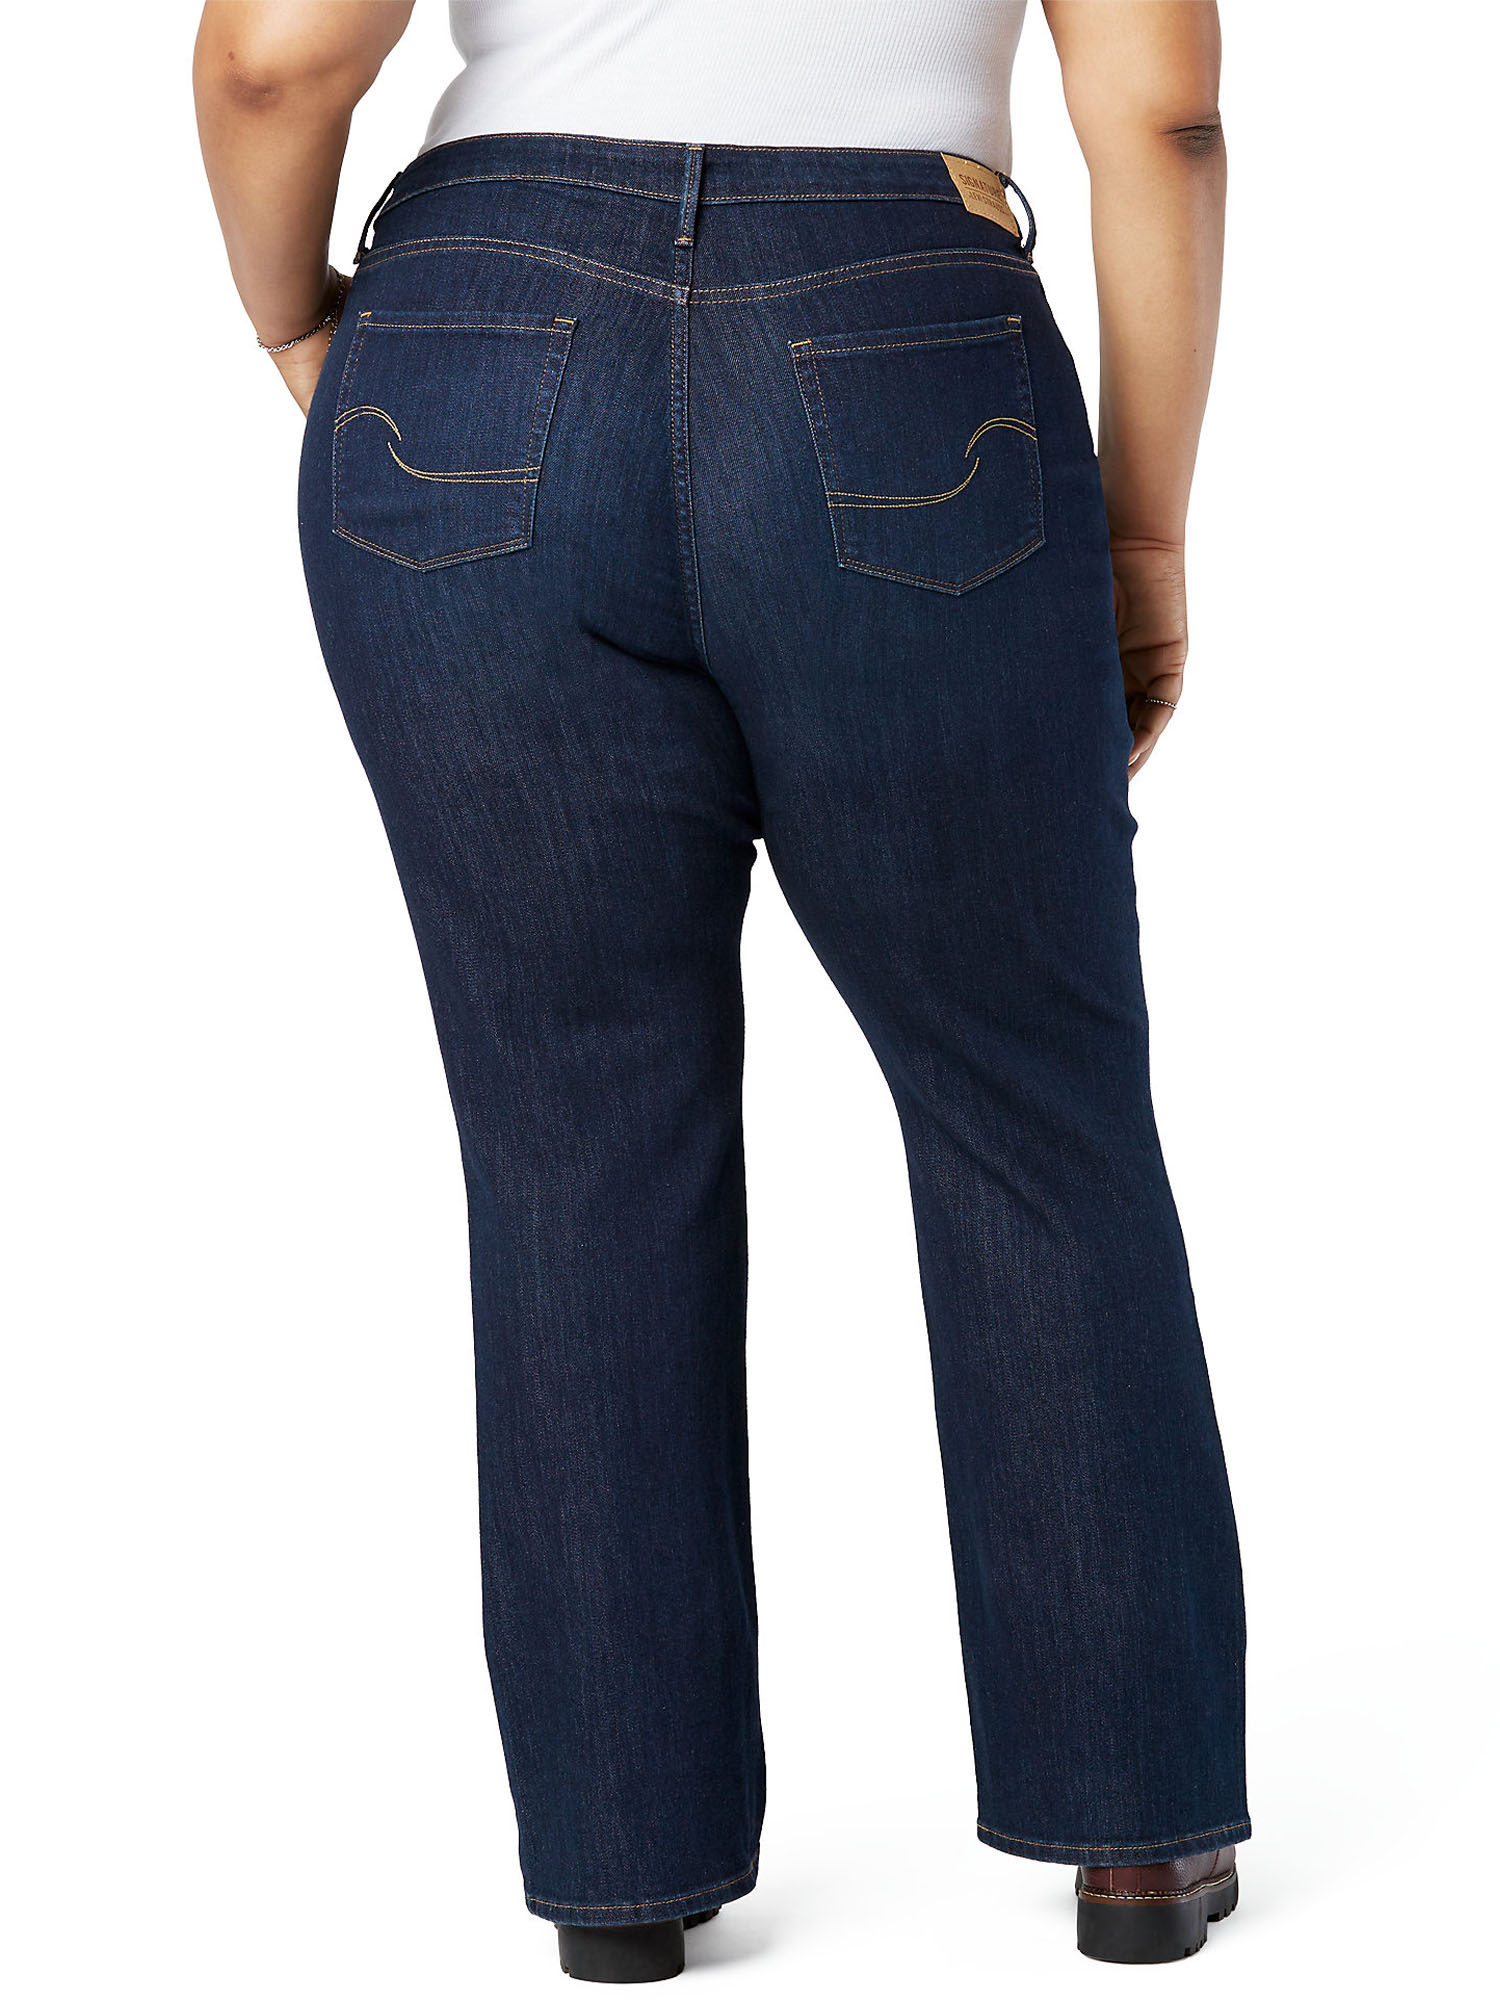 Signature by Levi Strauss & Co. Women's and Women's Plus Modern Bootcut Jeans - image 2 of 4